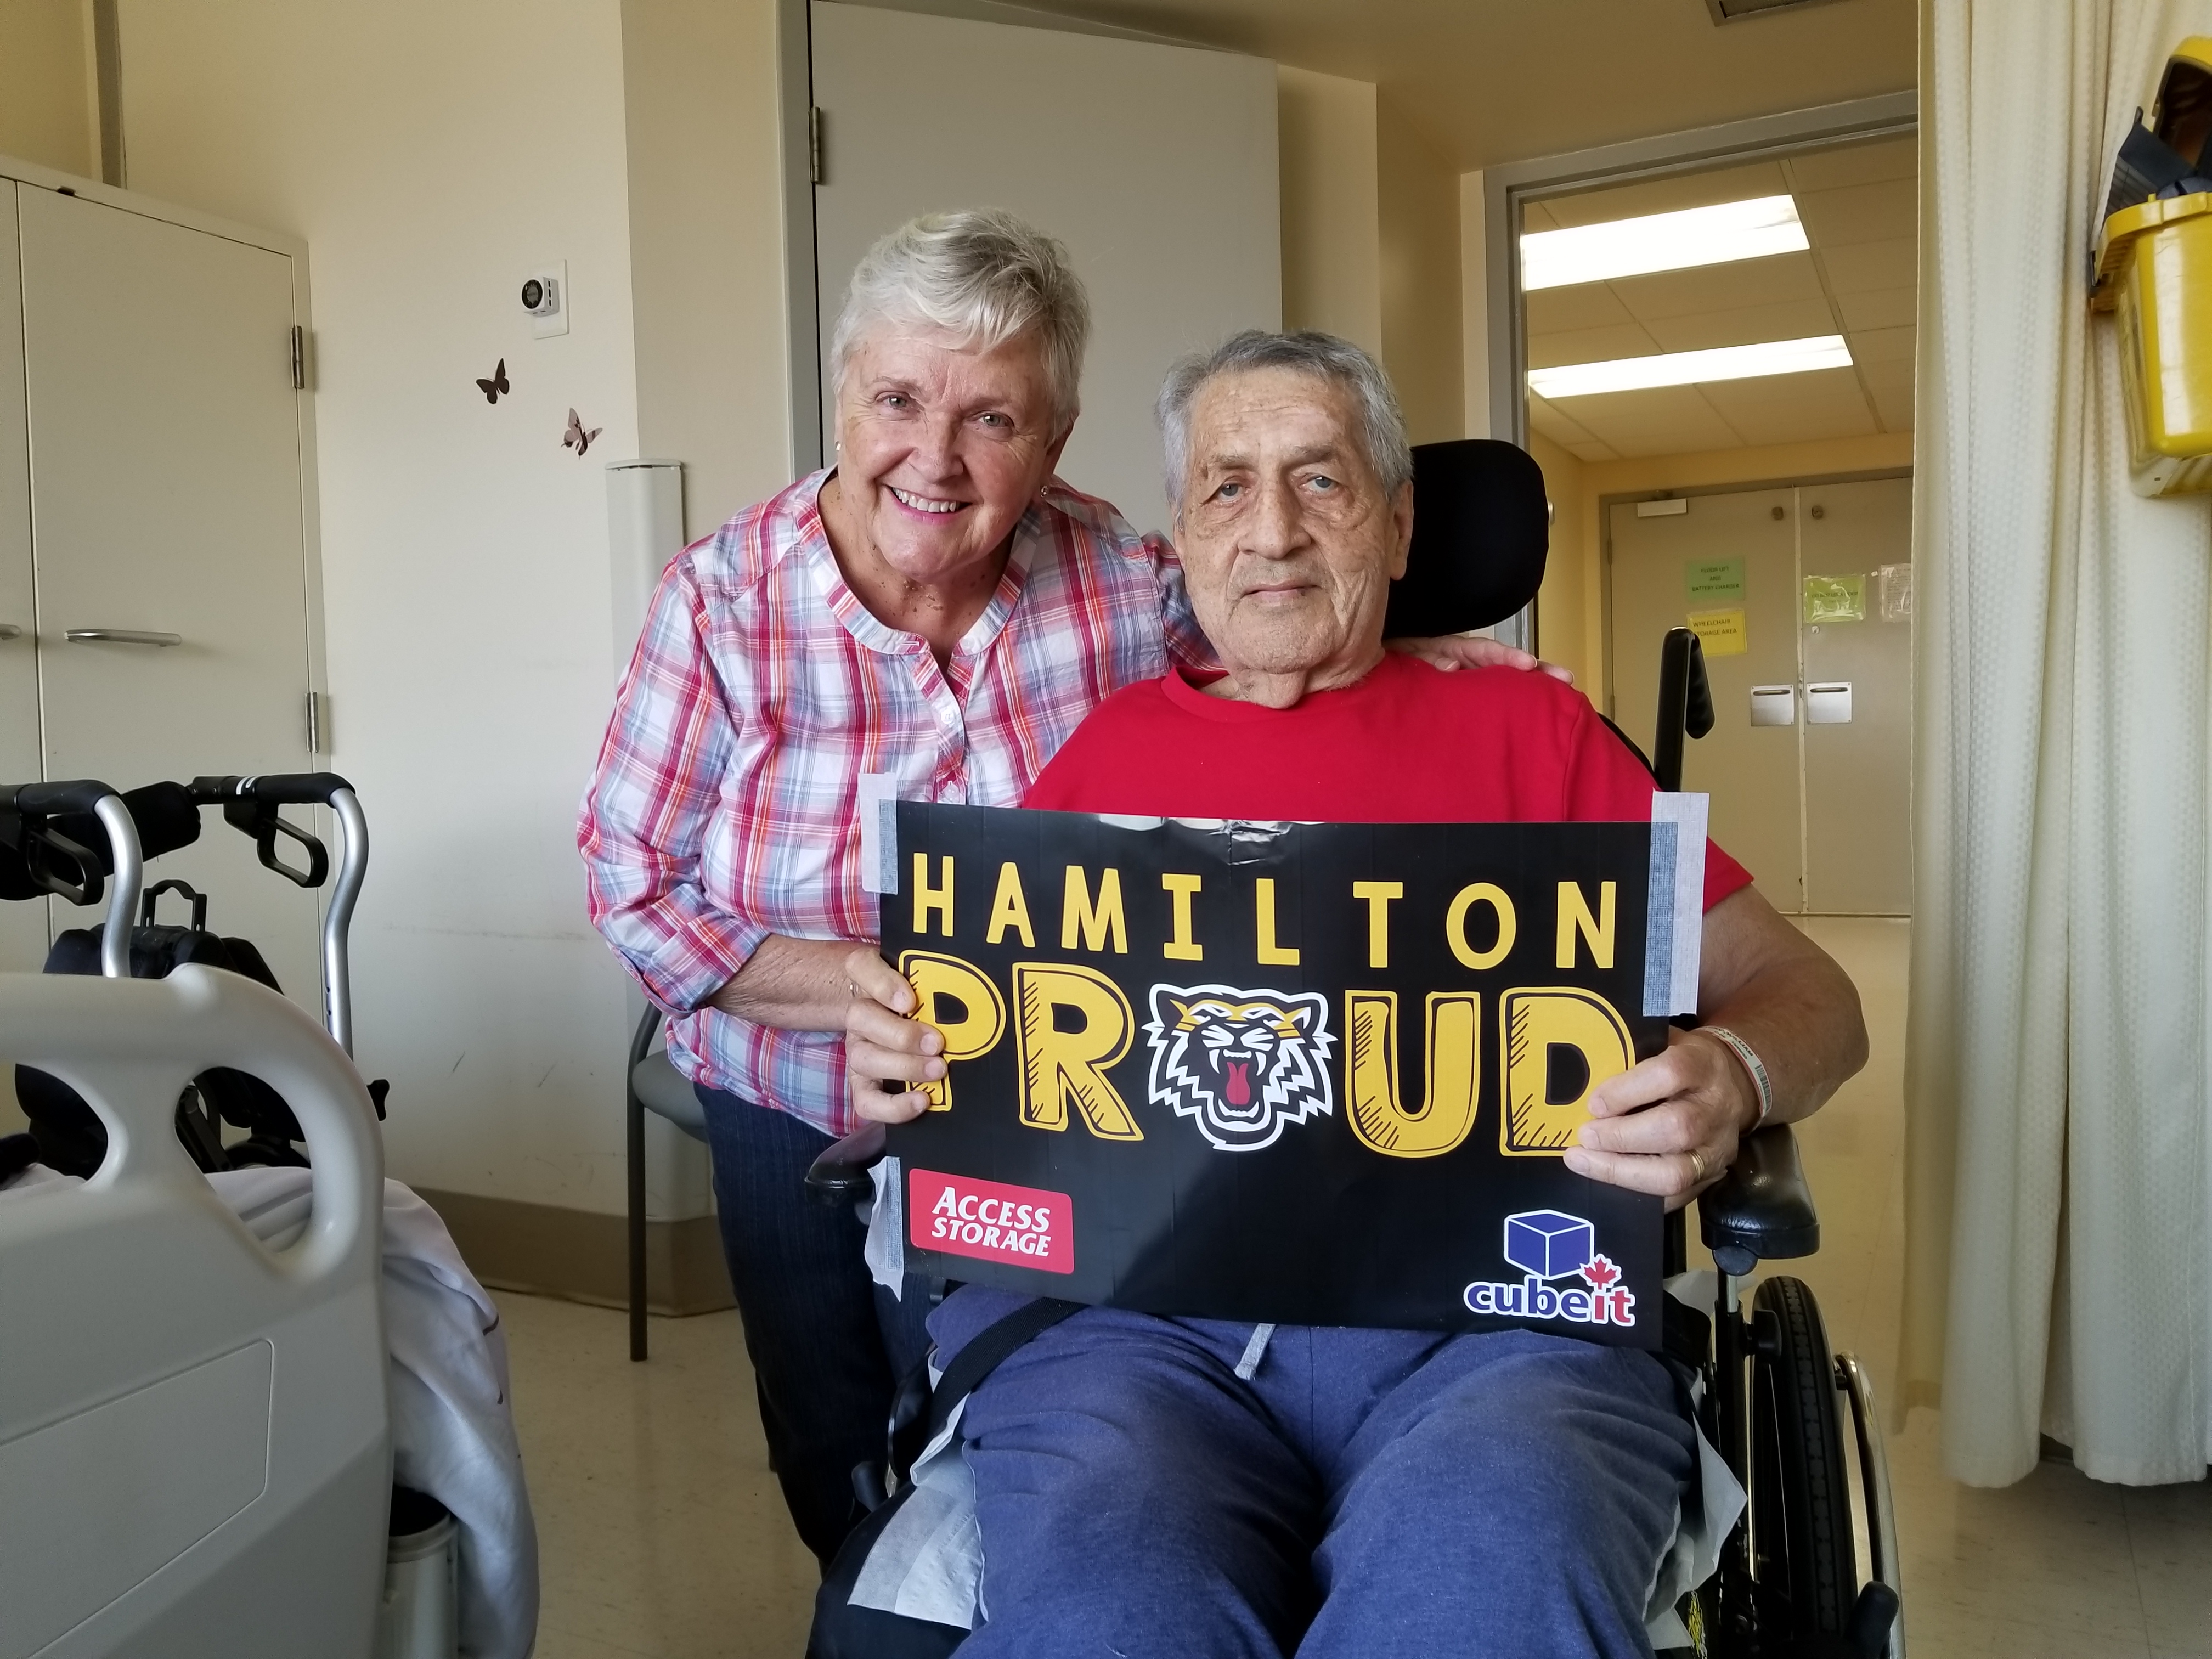 Kathy poses with her husband Bill, holding a Hamilton Proud sign